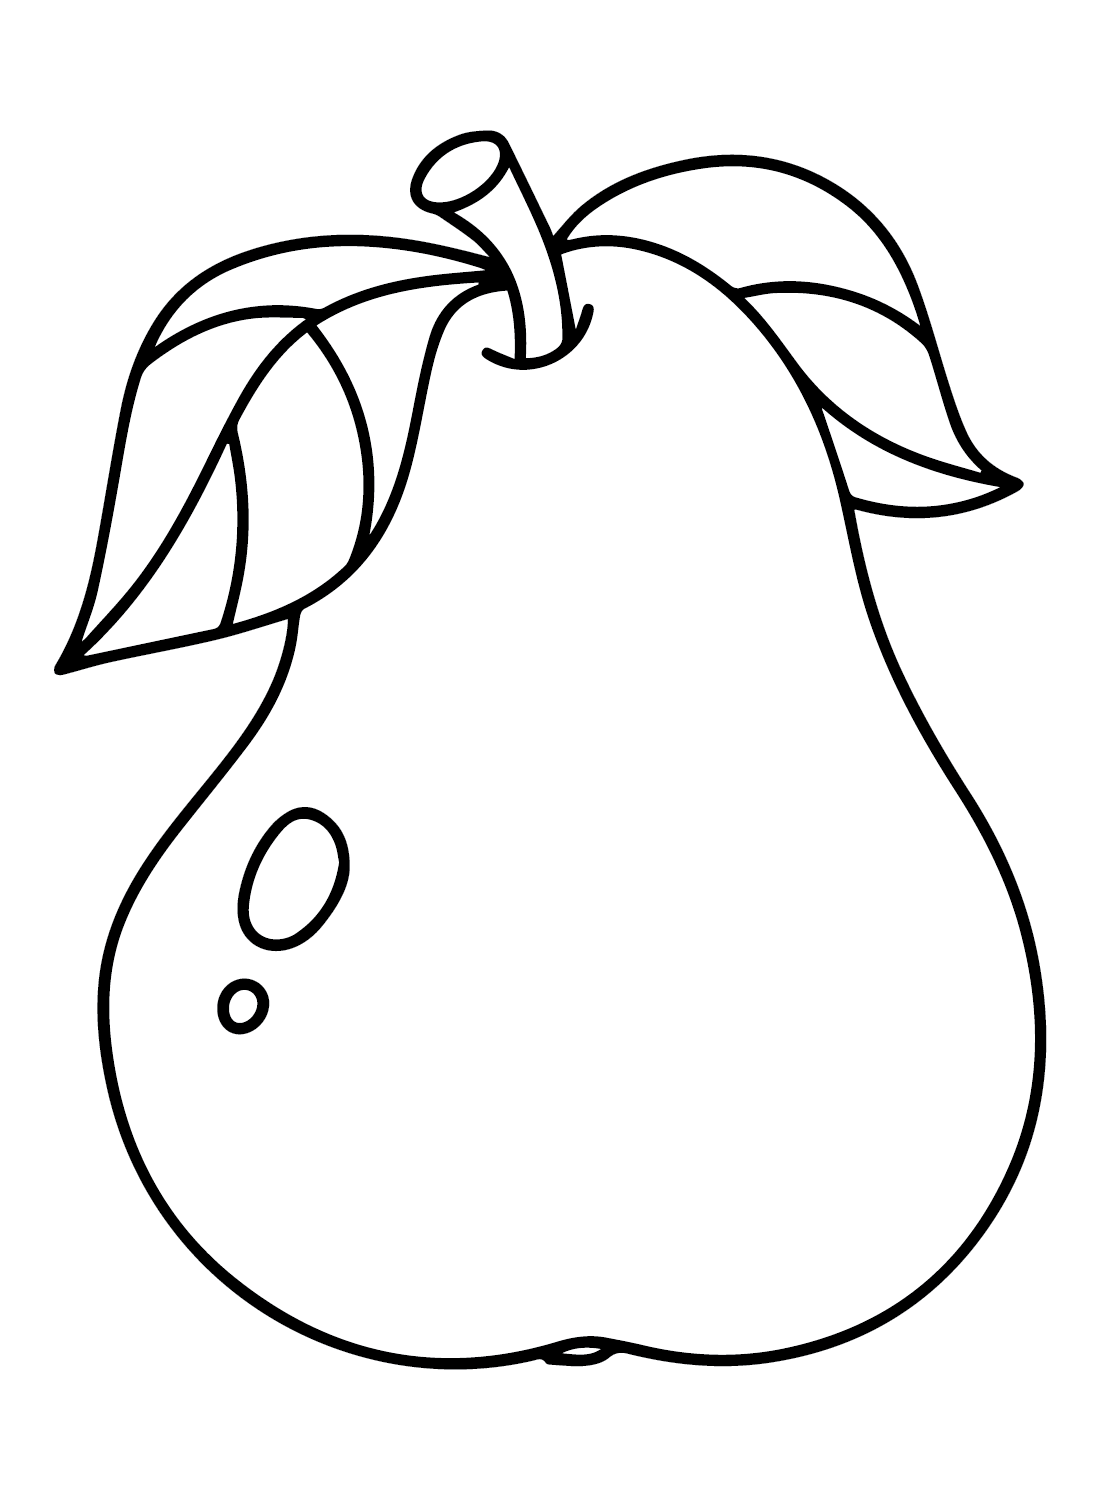 Big Pears from Pears